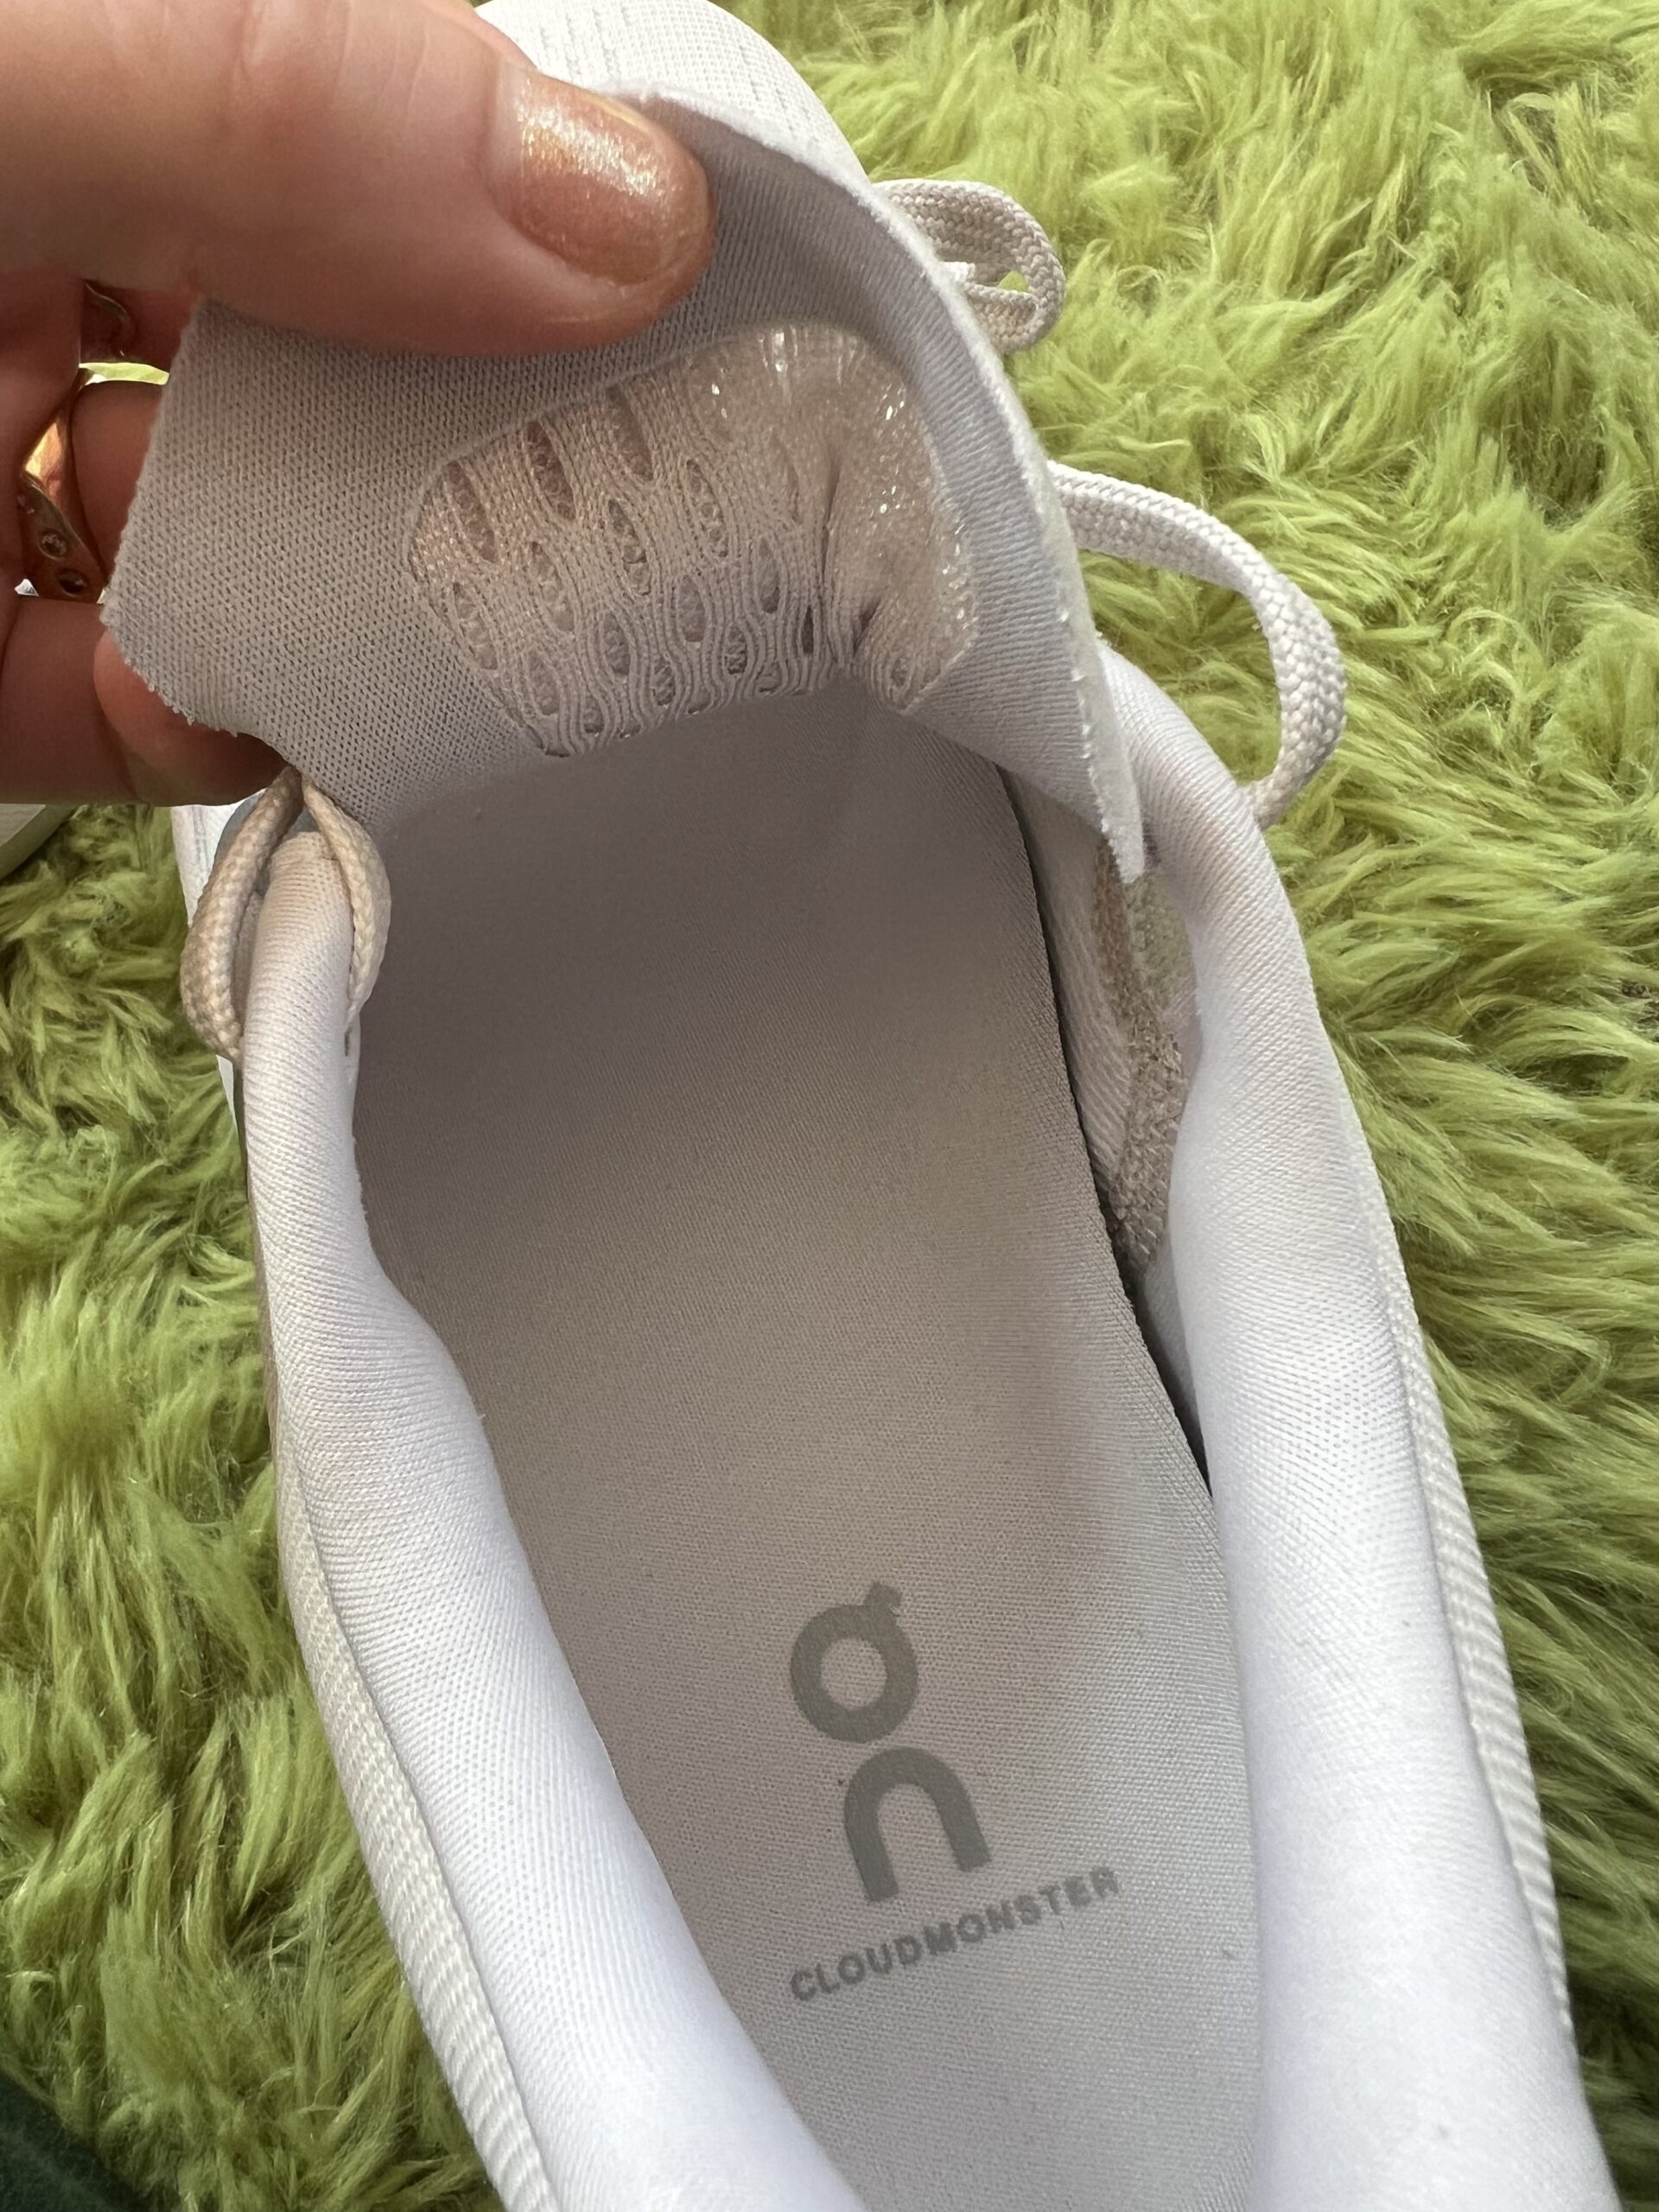 A person's hand holding open a light gray shoe with white shoelaces, showing the inner sole branded "cloudmonster" with a circular logo.